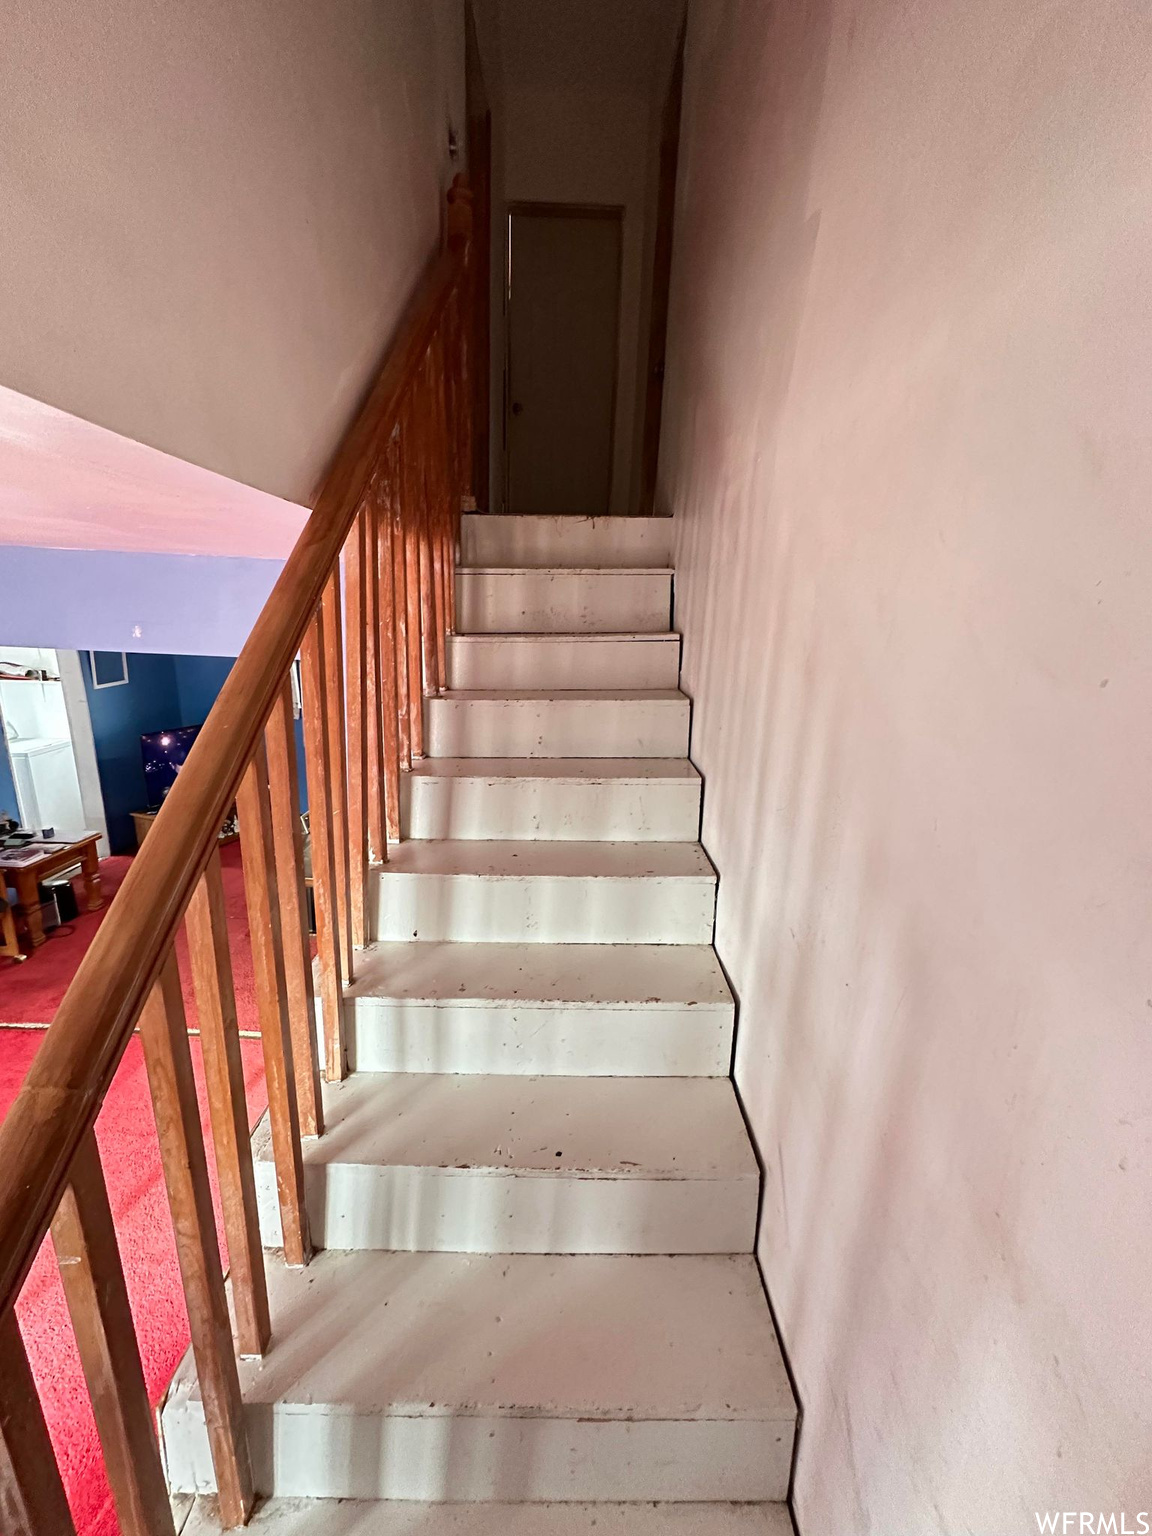 View of stairs